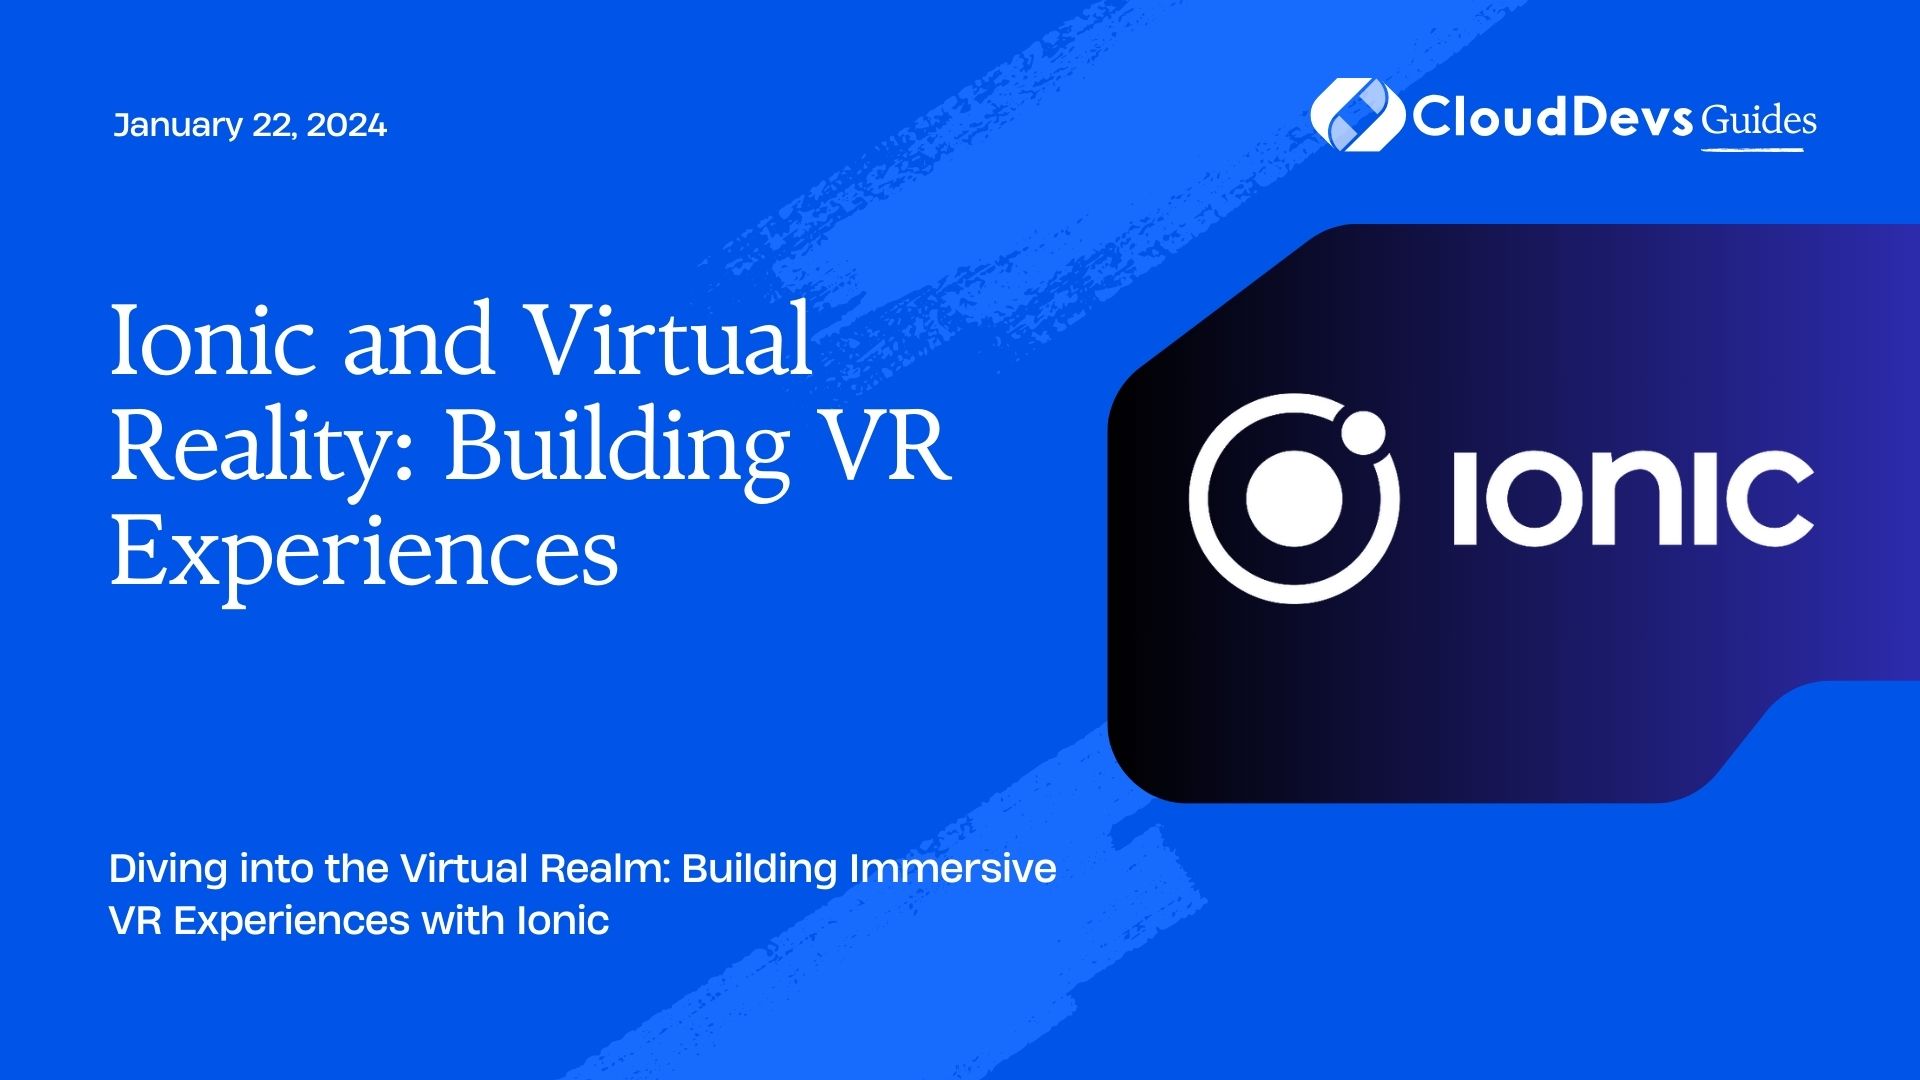 Ionic and Virtual Reality: Building VR Experiences